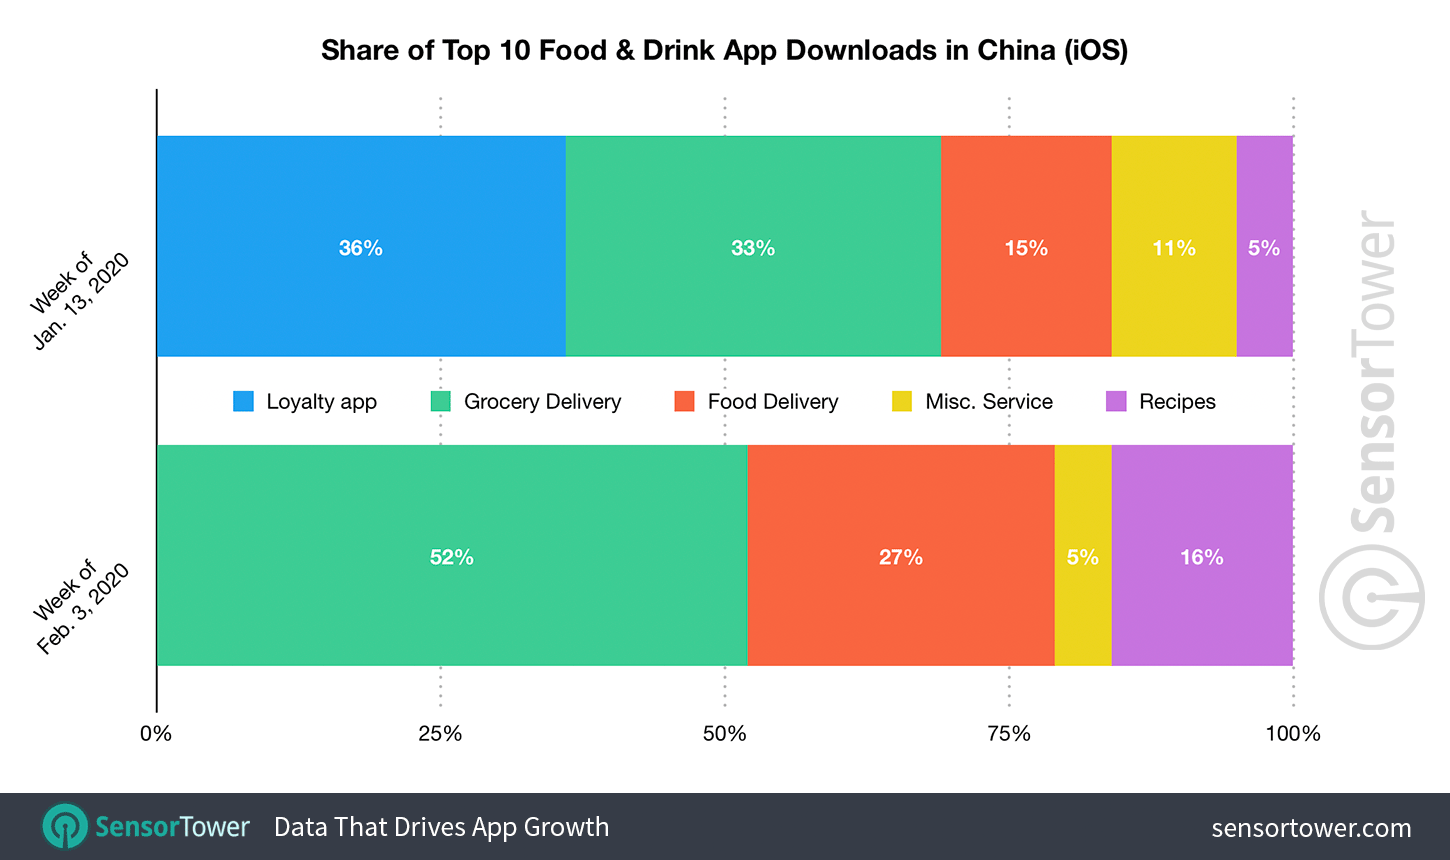 Share of Downloads by Type of App Among Top 10 Food Apps in China for the Weeks of January 3 and February 3, 2020